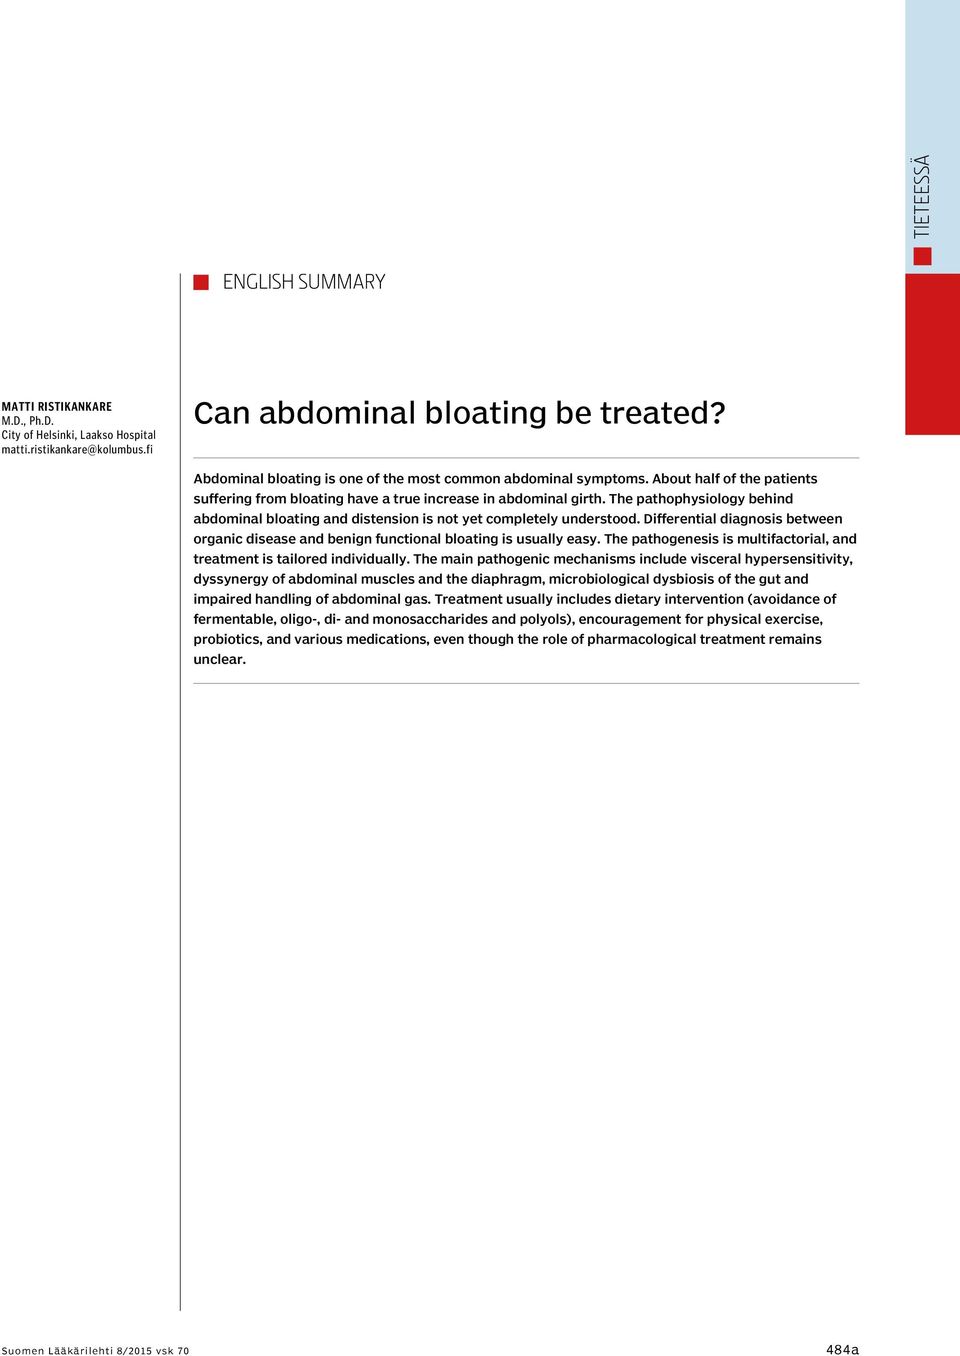 The pathophysiology behind abdominal bloating and distension is not yet completely understood. Differential diagnosis between organic disease and benign functional bloating is usually easy.